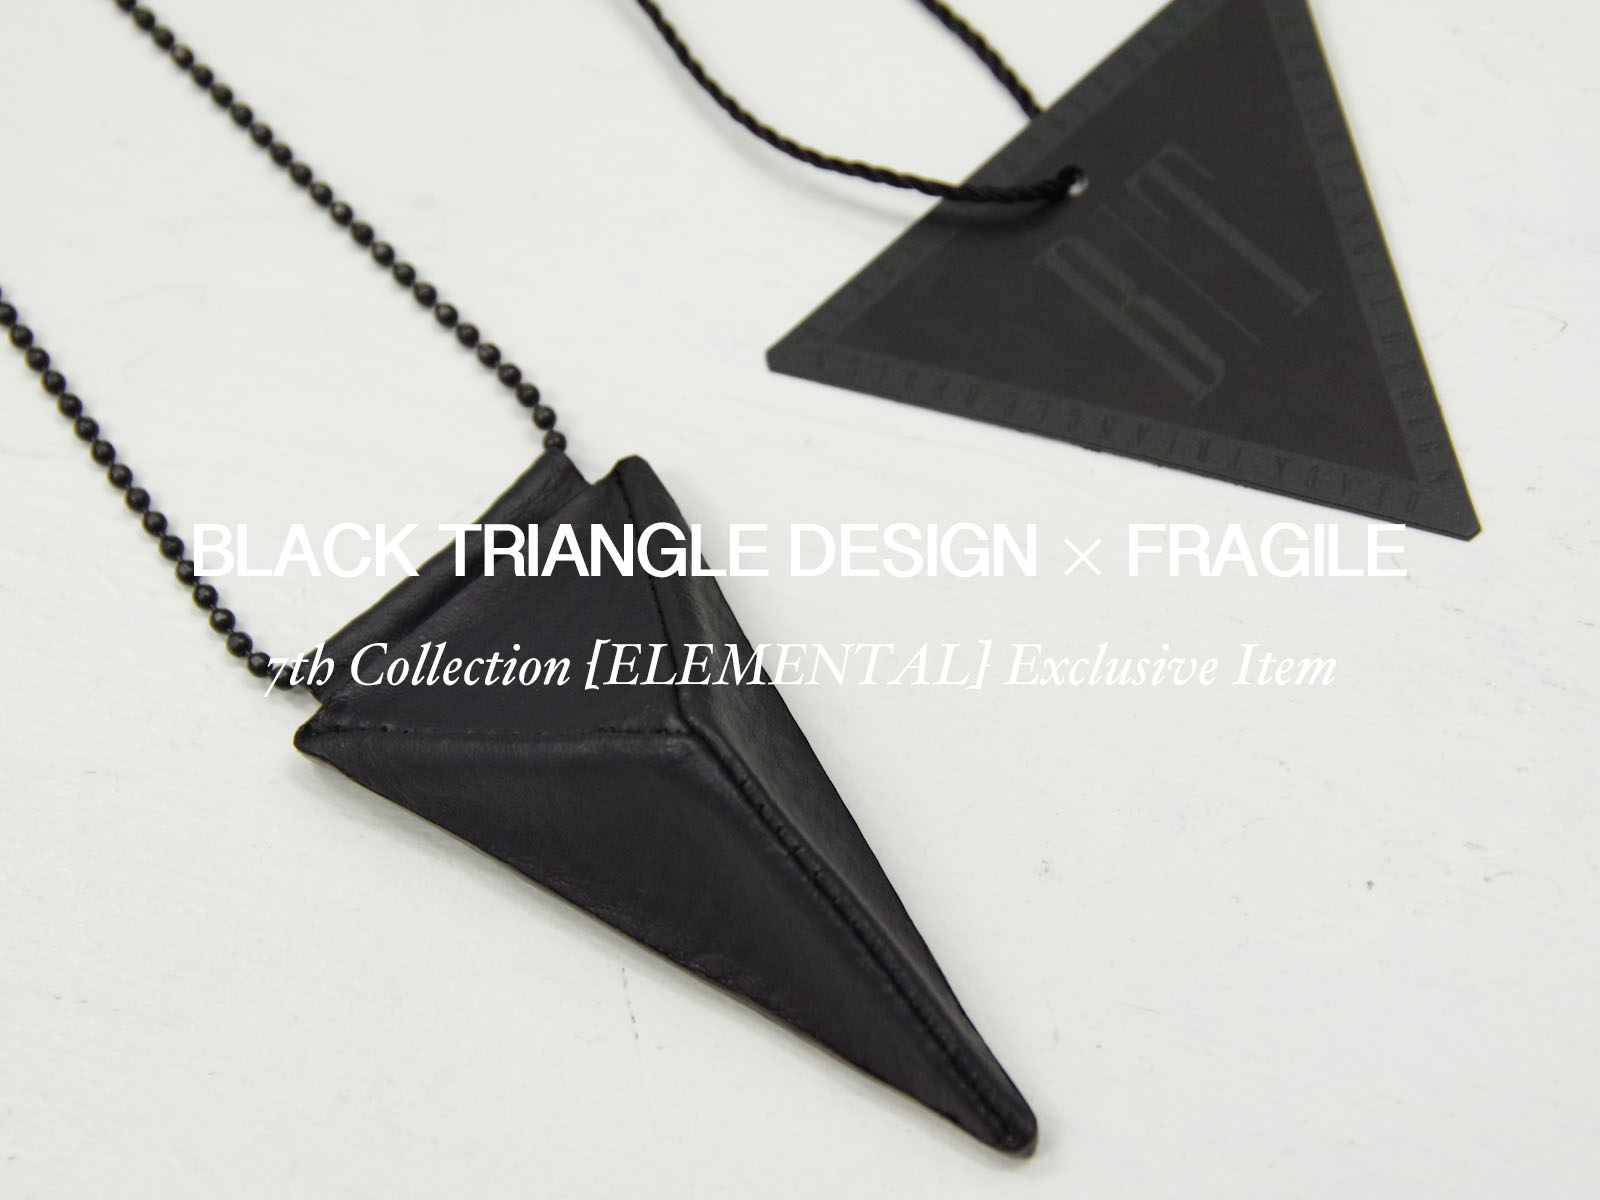 BLACK TRIANGLE DESIGN × FRAGILE 7th Collection [ELEMENTAL] Exclusive Item